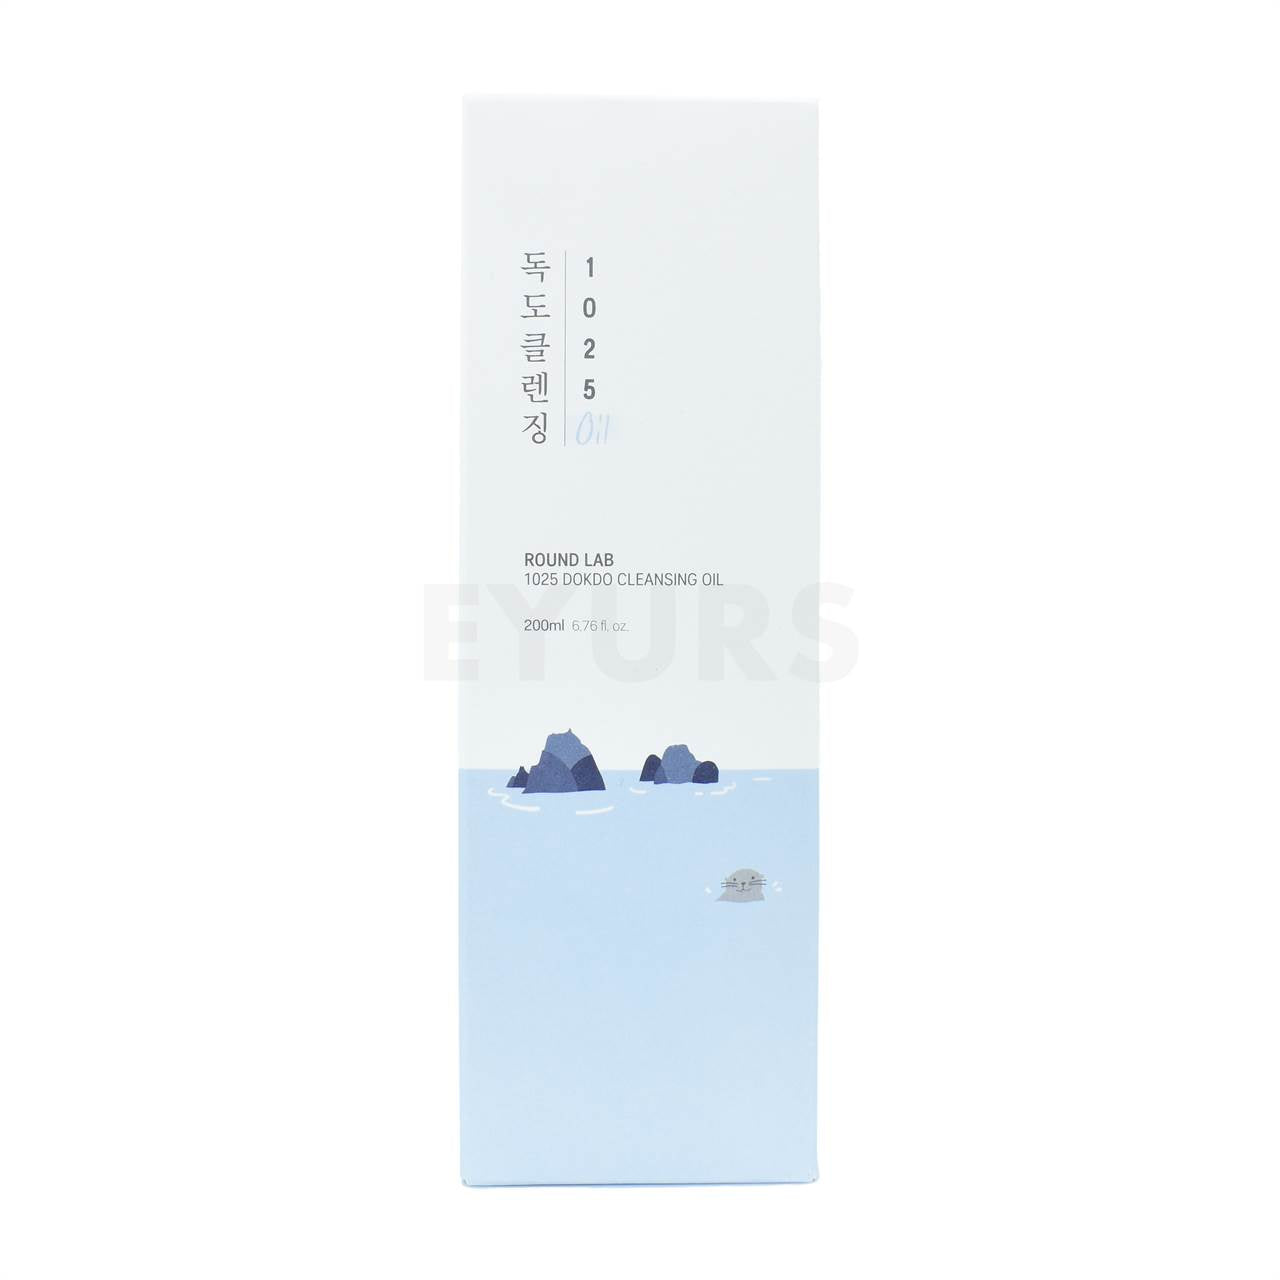 round lab 1025 dokdo cleansing oil 200ml front side packaging